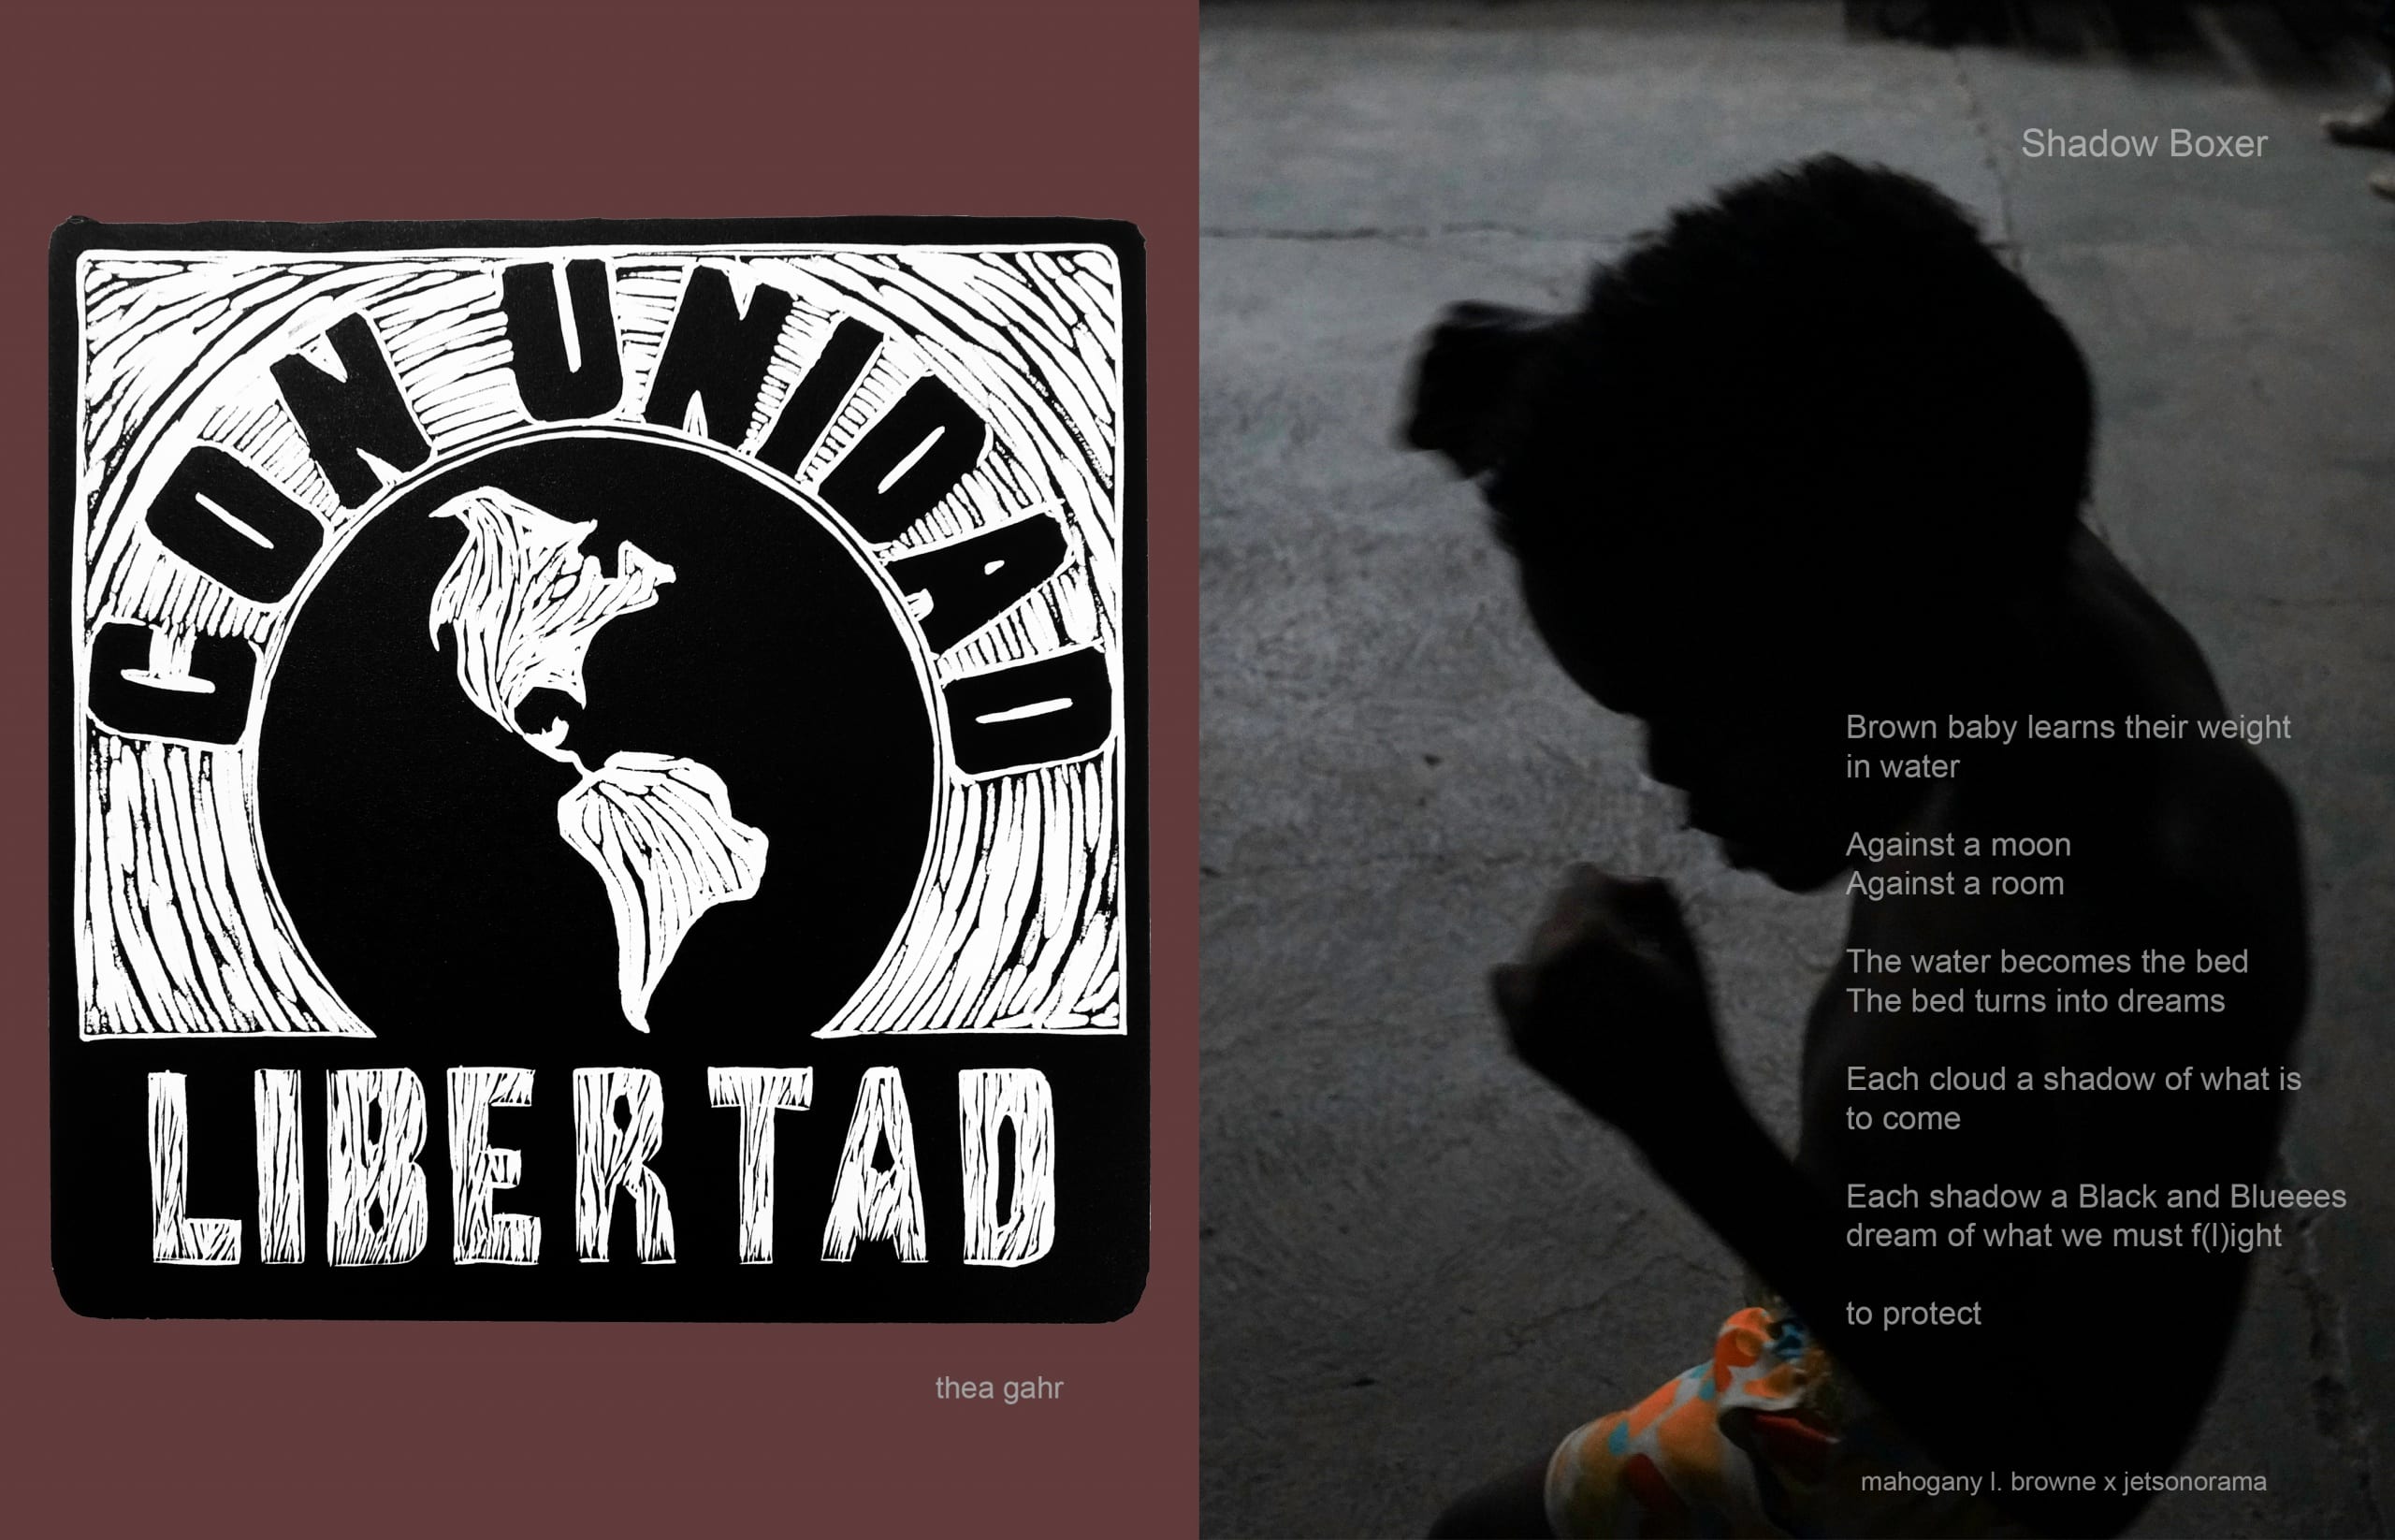 To left, black and white woodcut print of the globe with the words "Con Unidad" over it and "Libertad" under it; to right, color photograph of very young boy in silhouette who appears to be throwing a boxing combination, overlaid with a poem